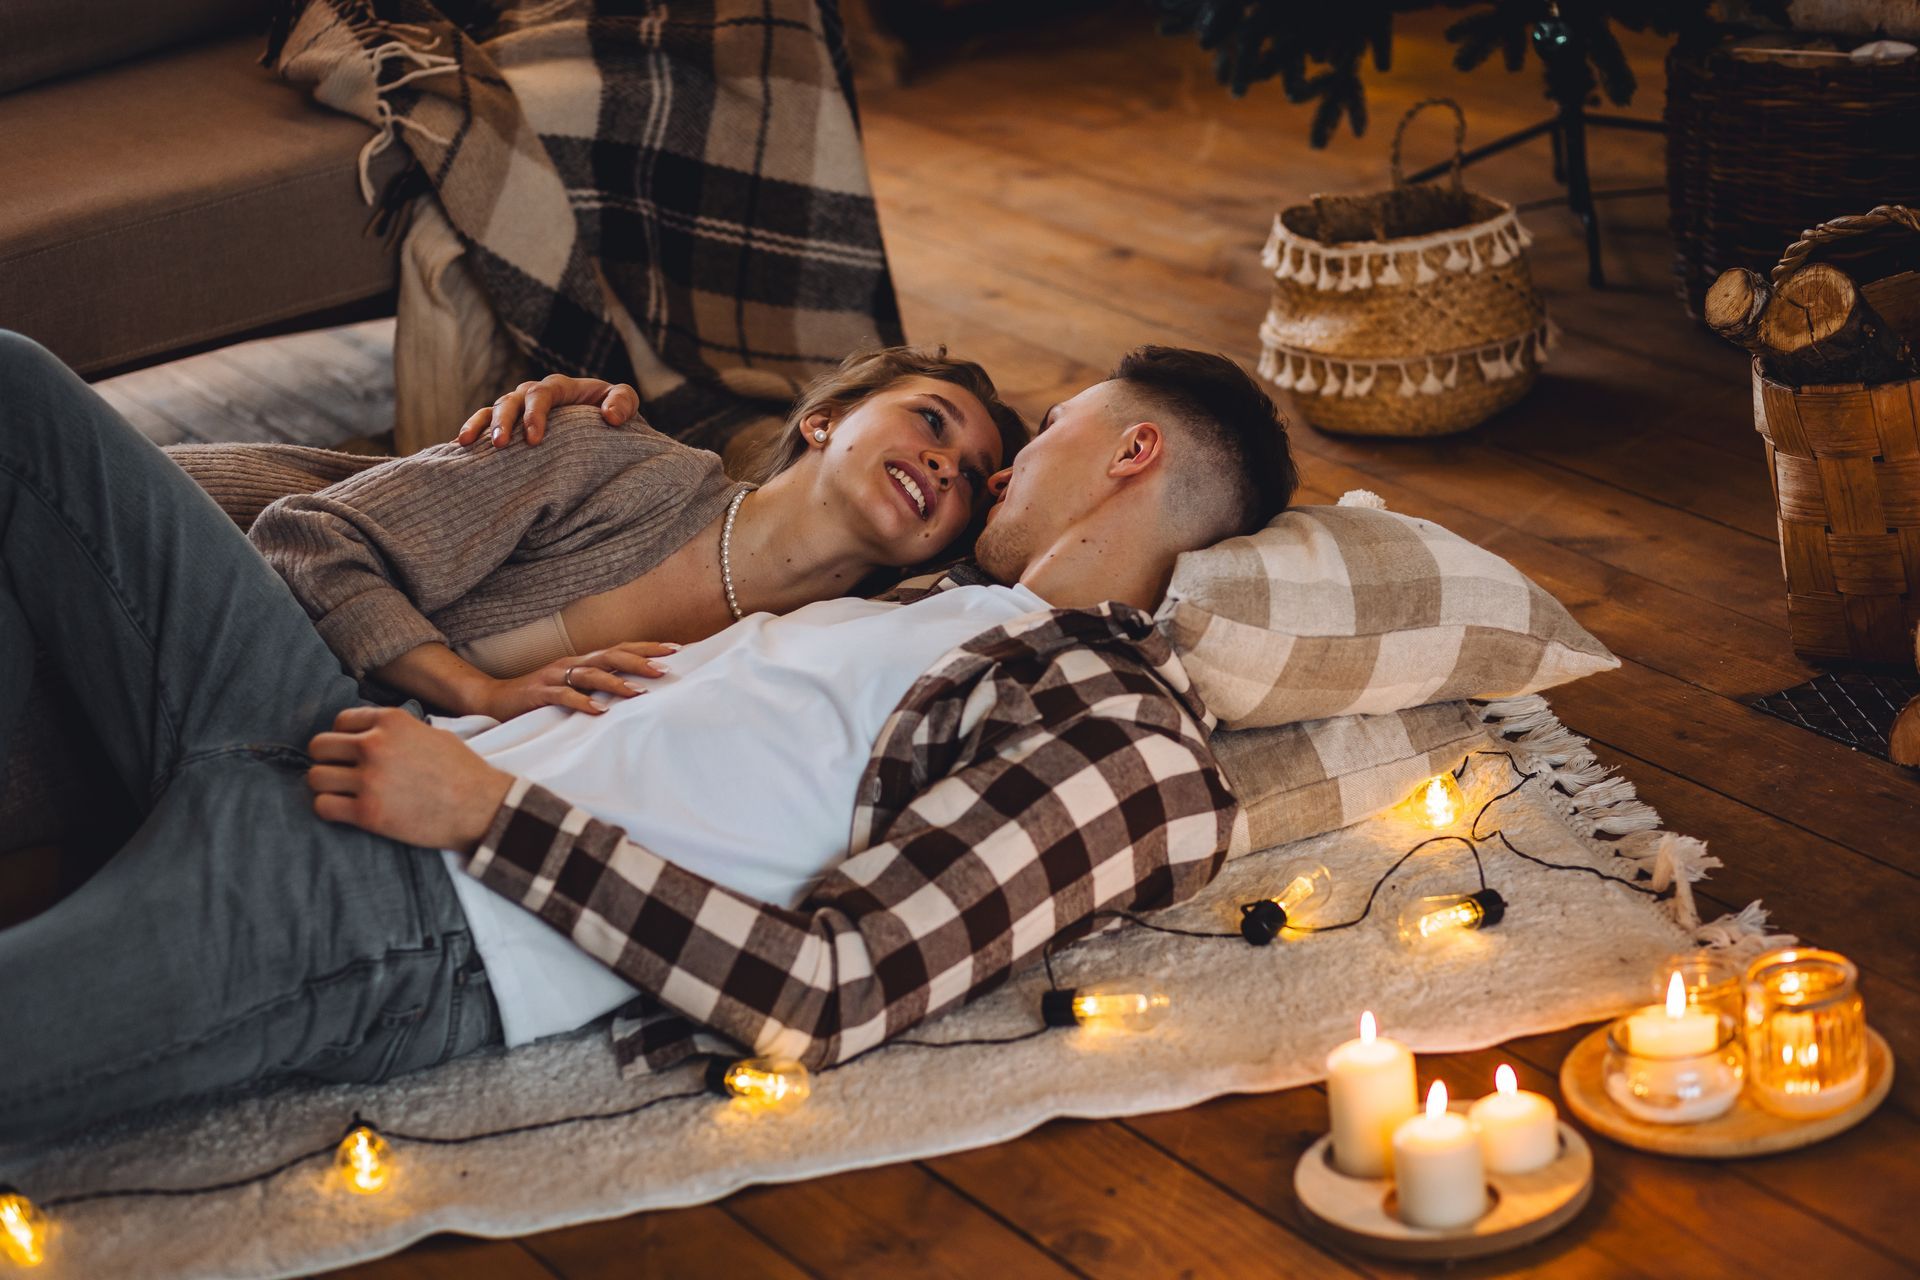 A man and a woman are laying on a blanket on the floor next to candles.